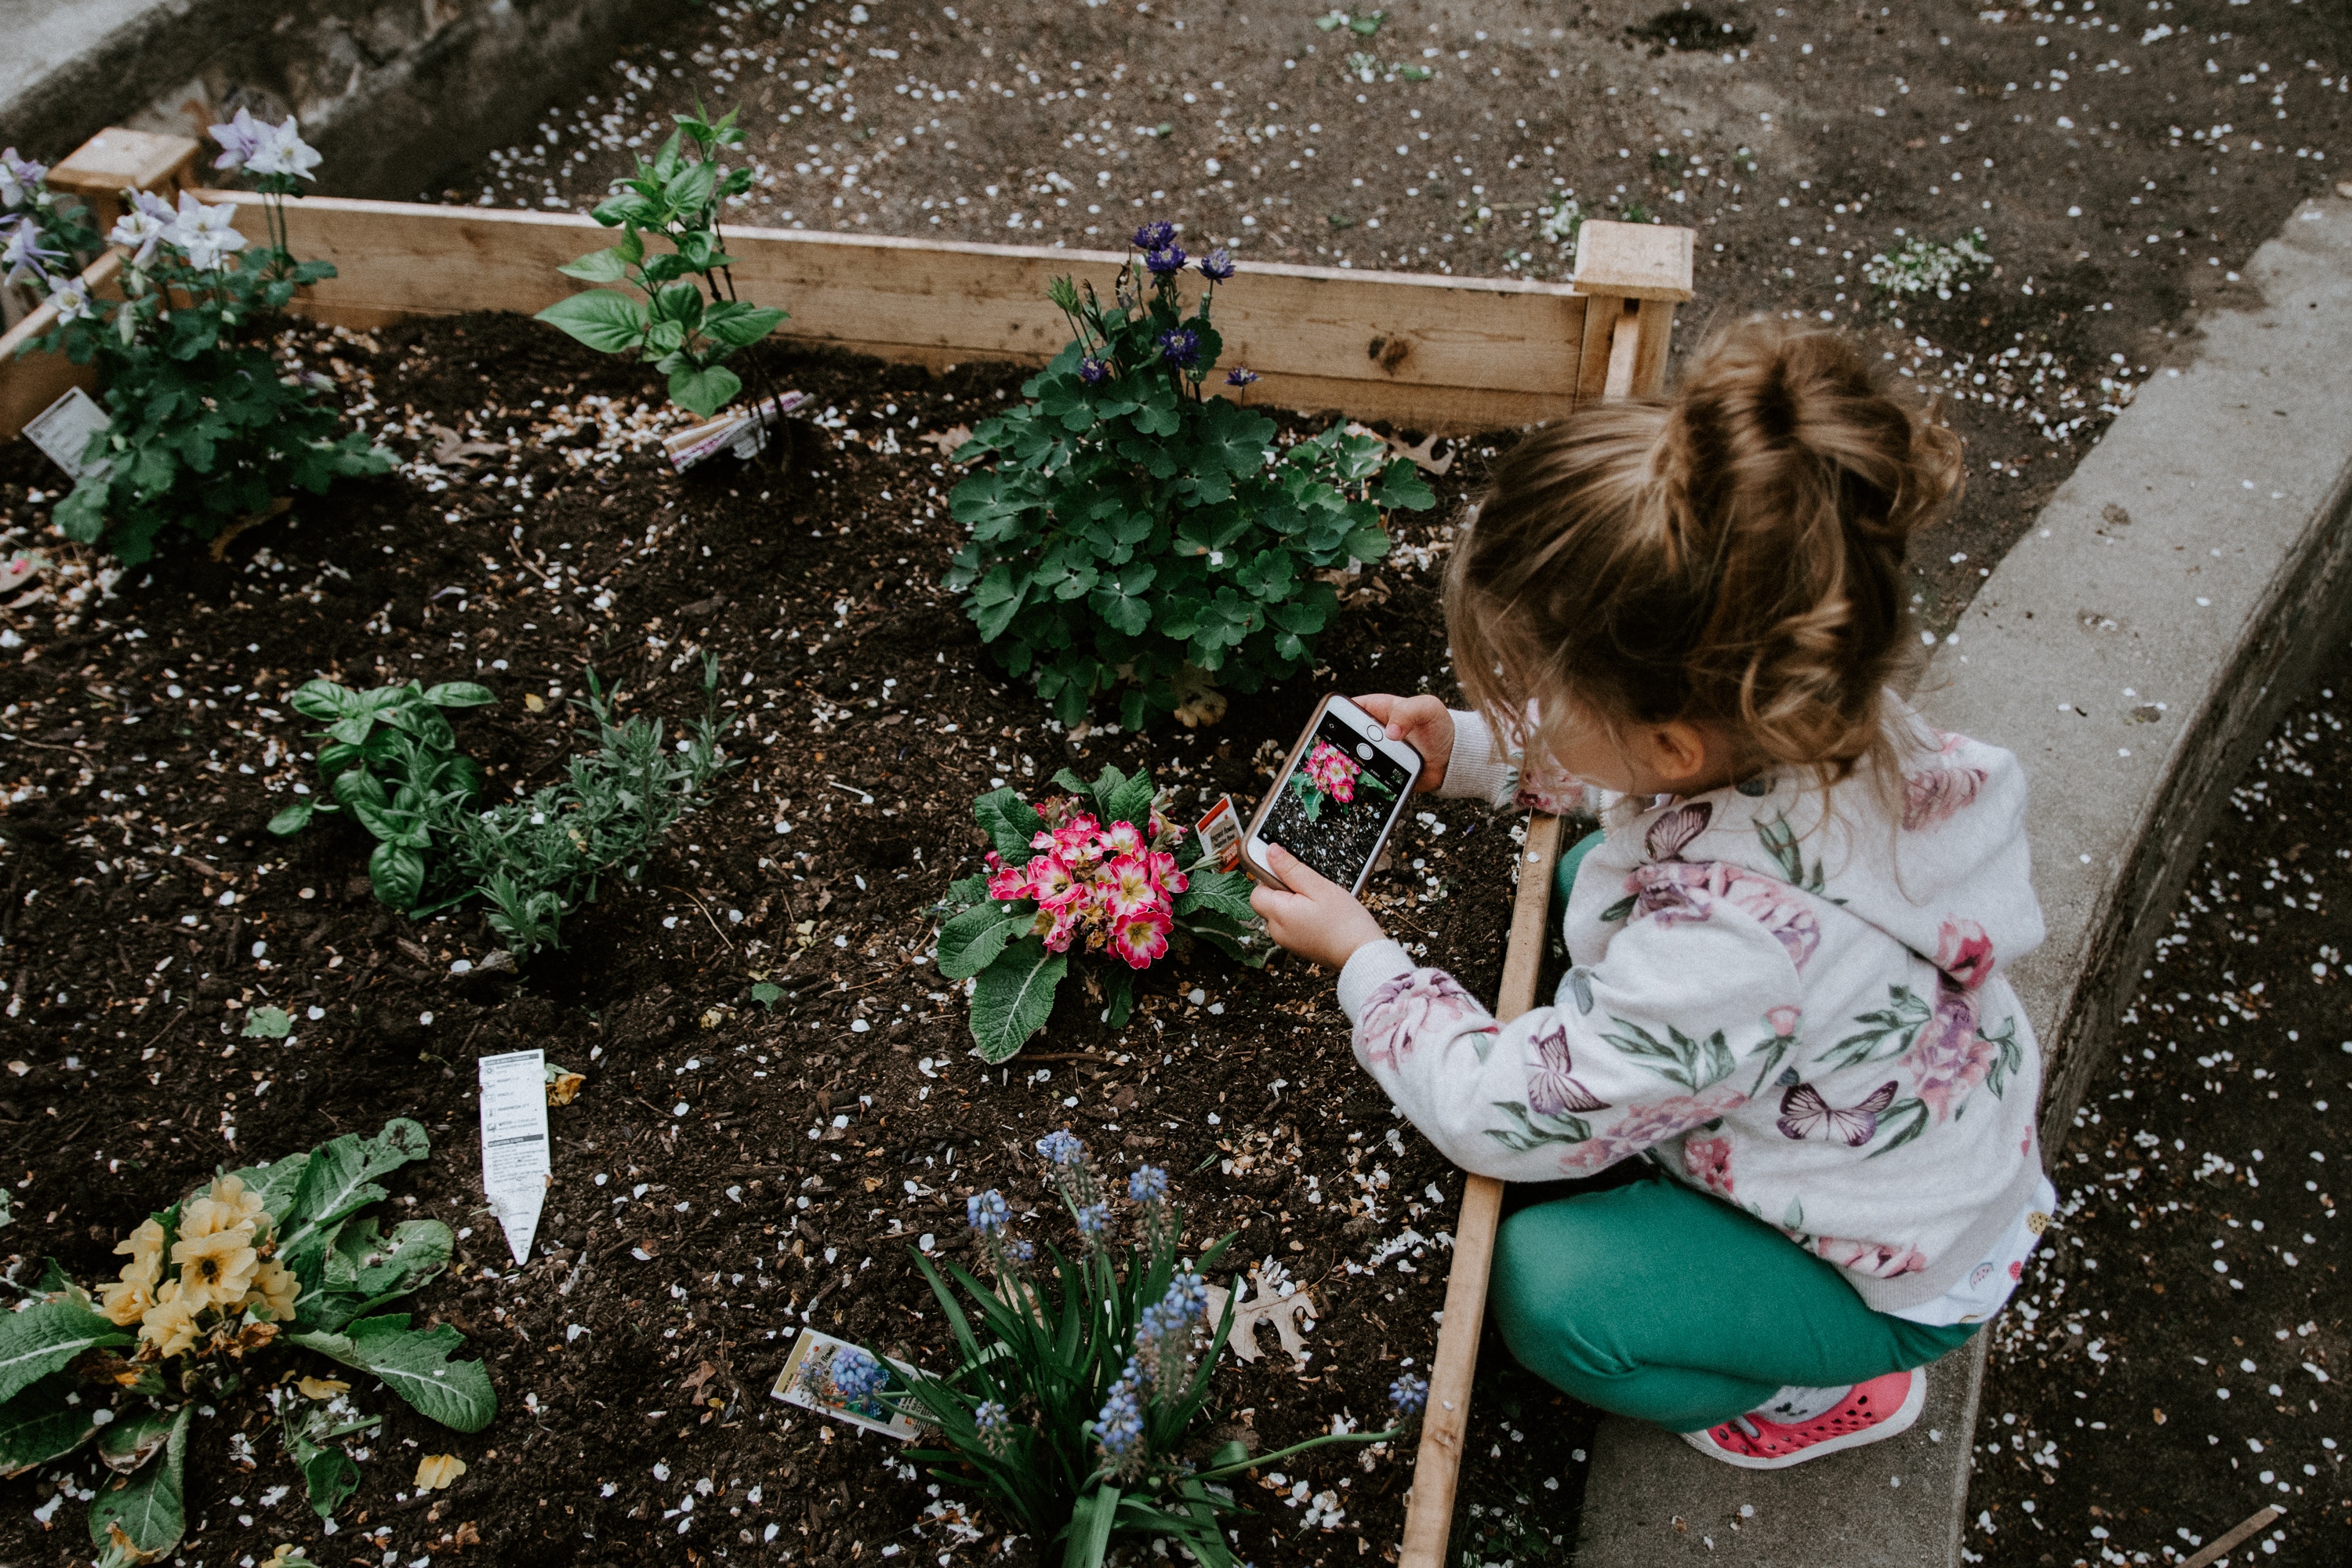 photographer, flowers, miscellanea, miscellaneous, flower bed, flowerbed, girl, child, hobby, interest